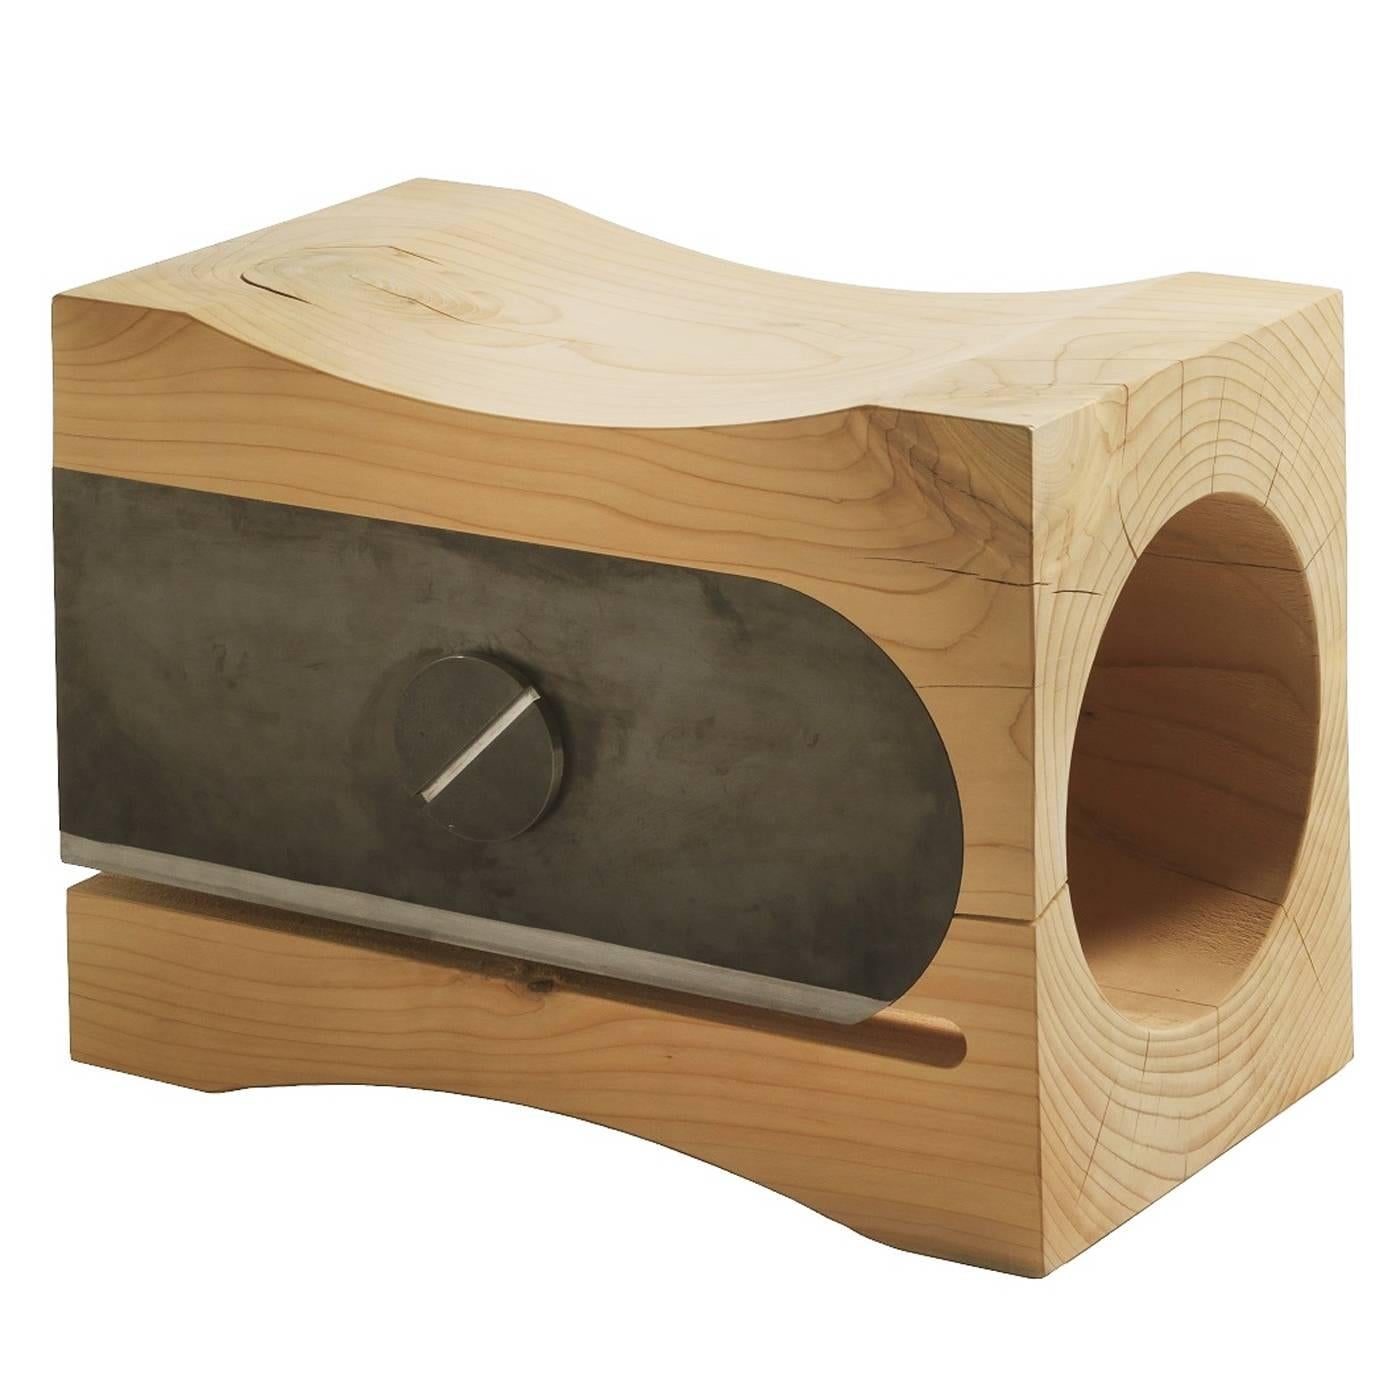 Stool sharpener all made in solid cedar wood
perfumed machined from a single cedar trunk.
Big pencil sharpener with detail in metal. Made
from completely natural cedar wood, hand-crafted.
Solid cedar wood include movement, 
cracks and changes in